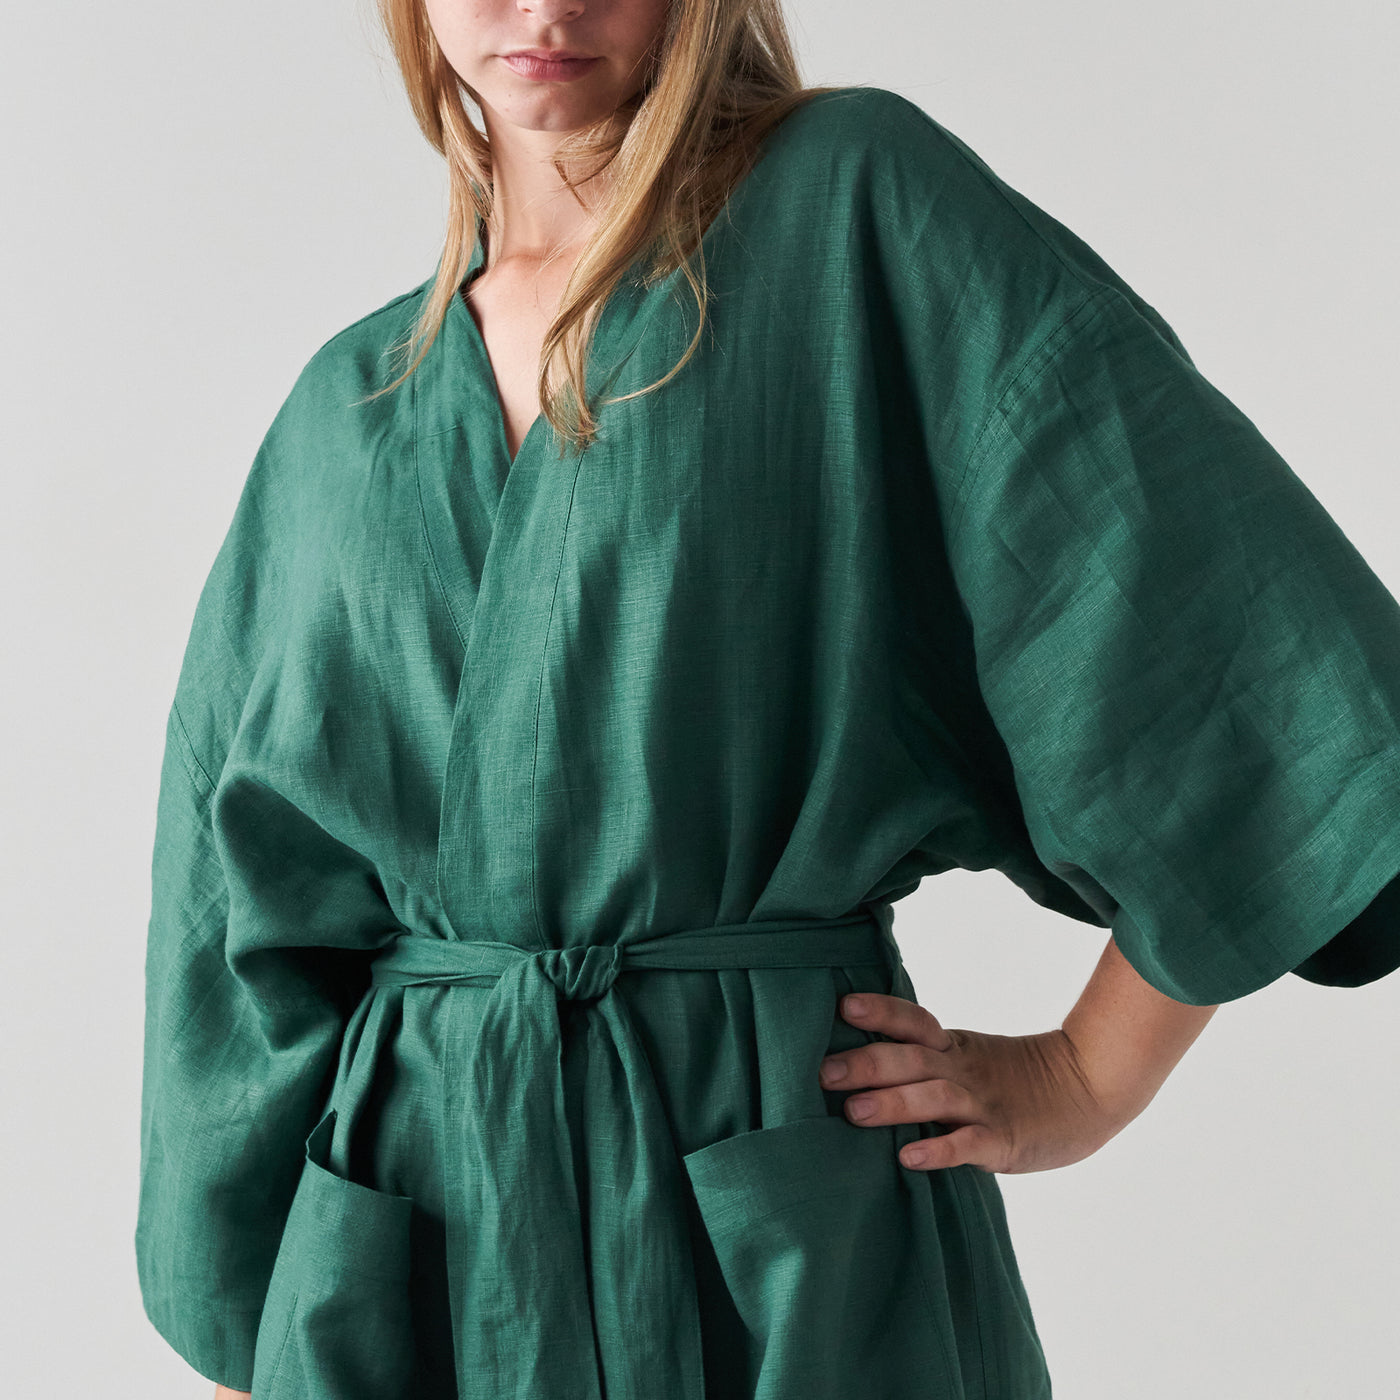 French Flax Linen Robe in Jade